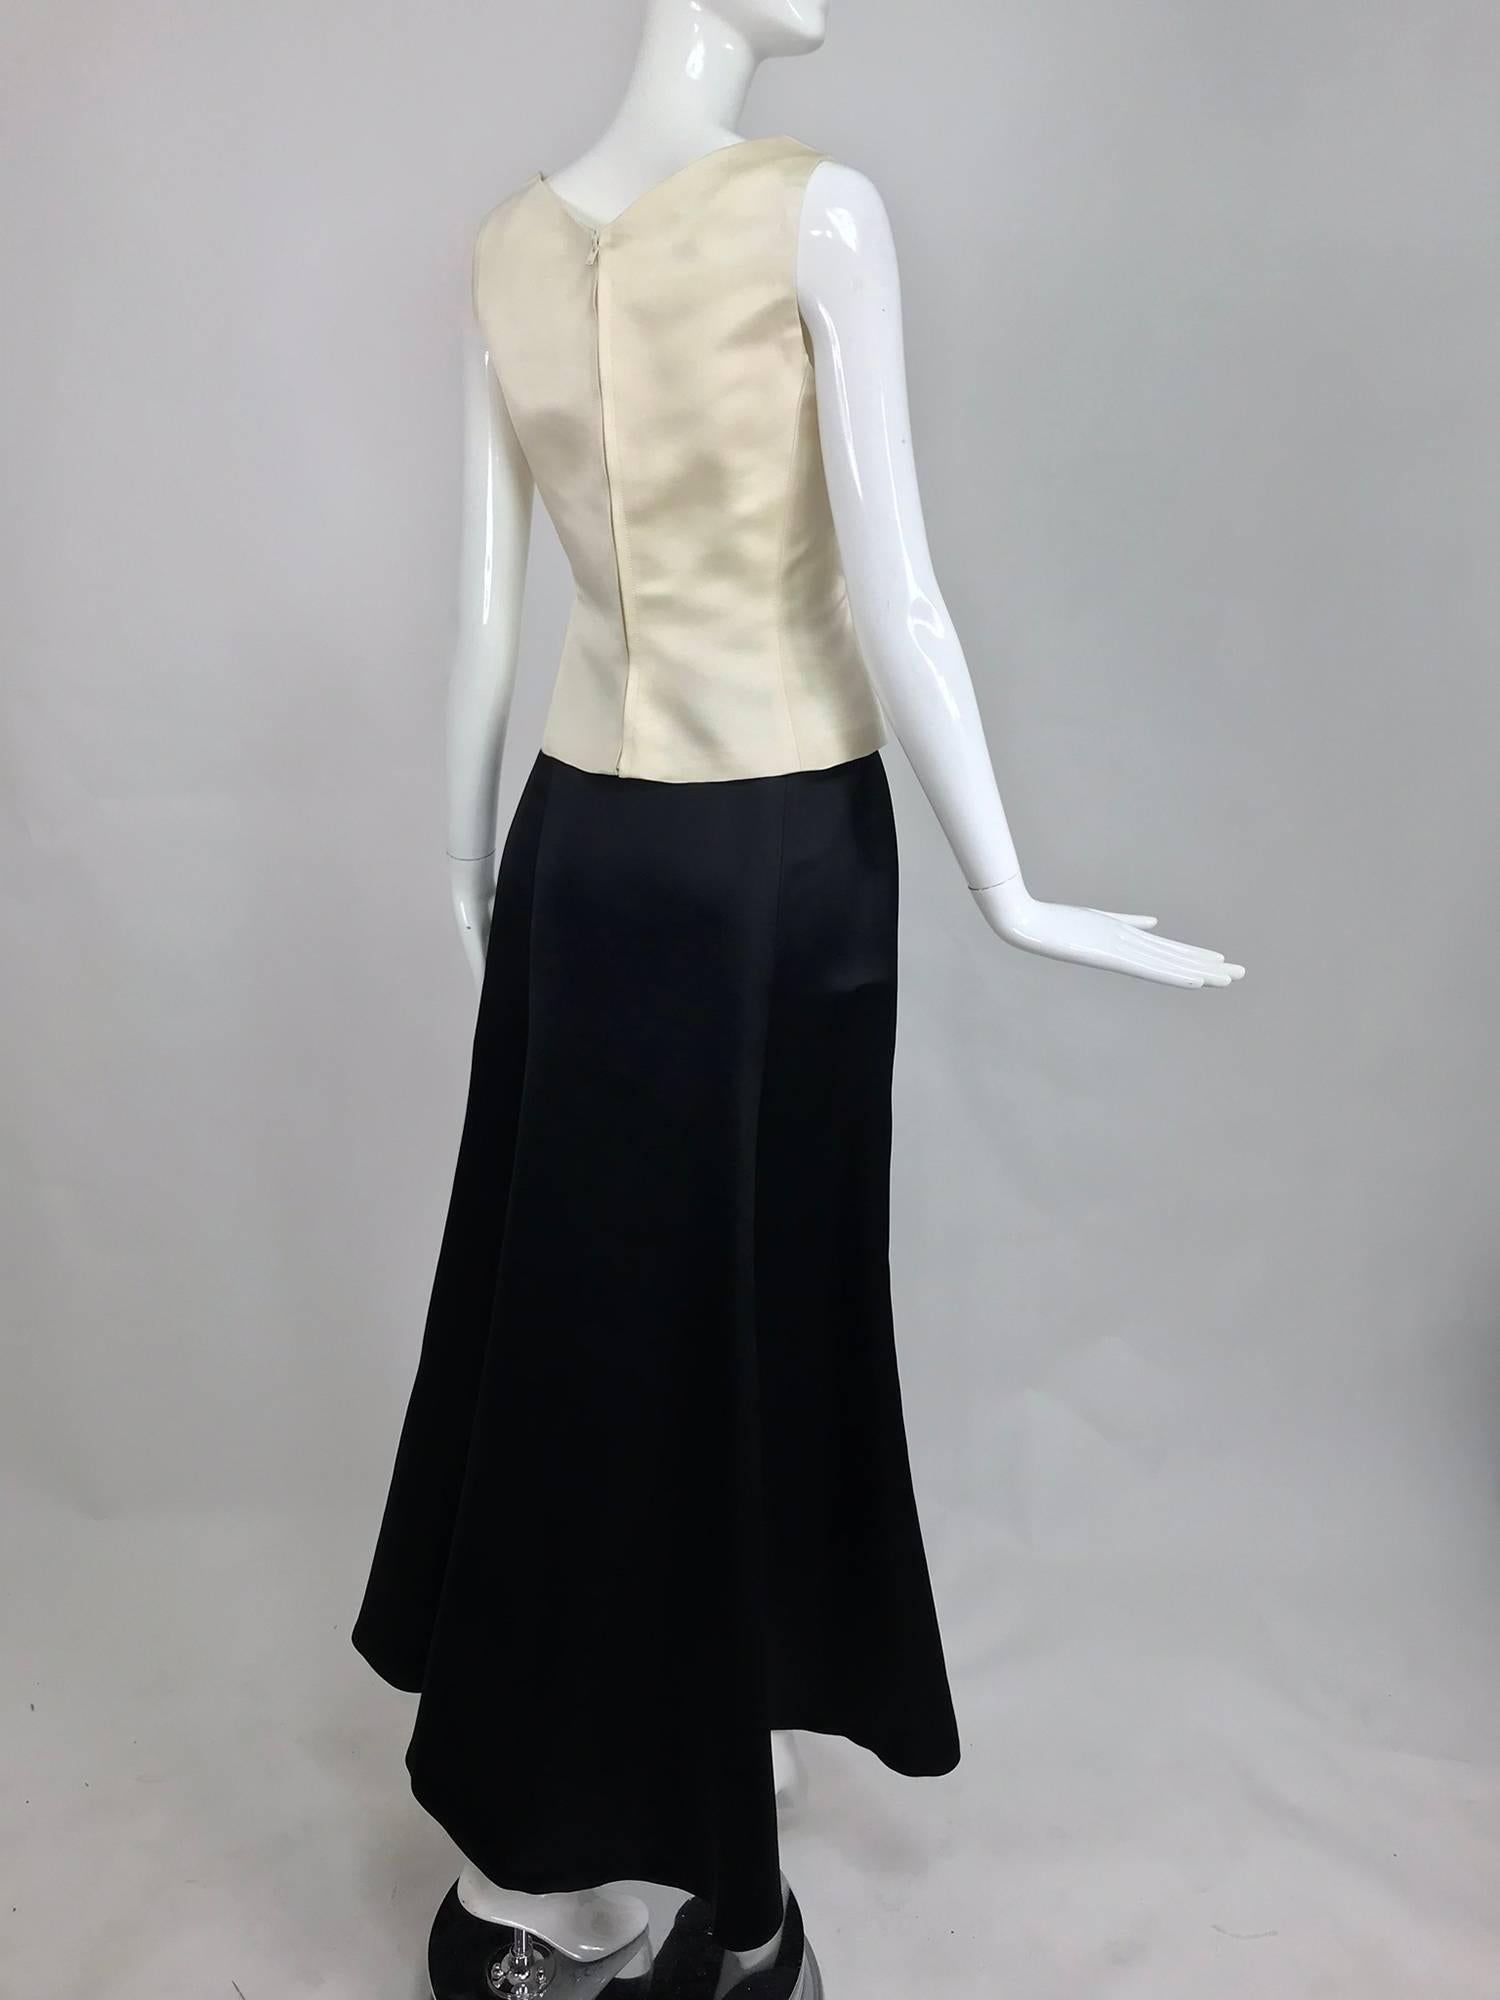 Black Vintage Bill Blass evening top and skirt set in cream and black silk satin 1980s For Sale